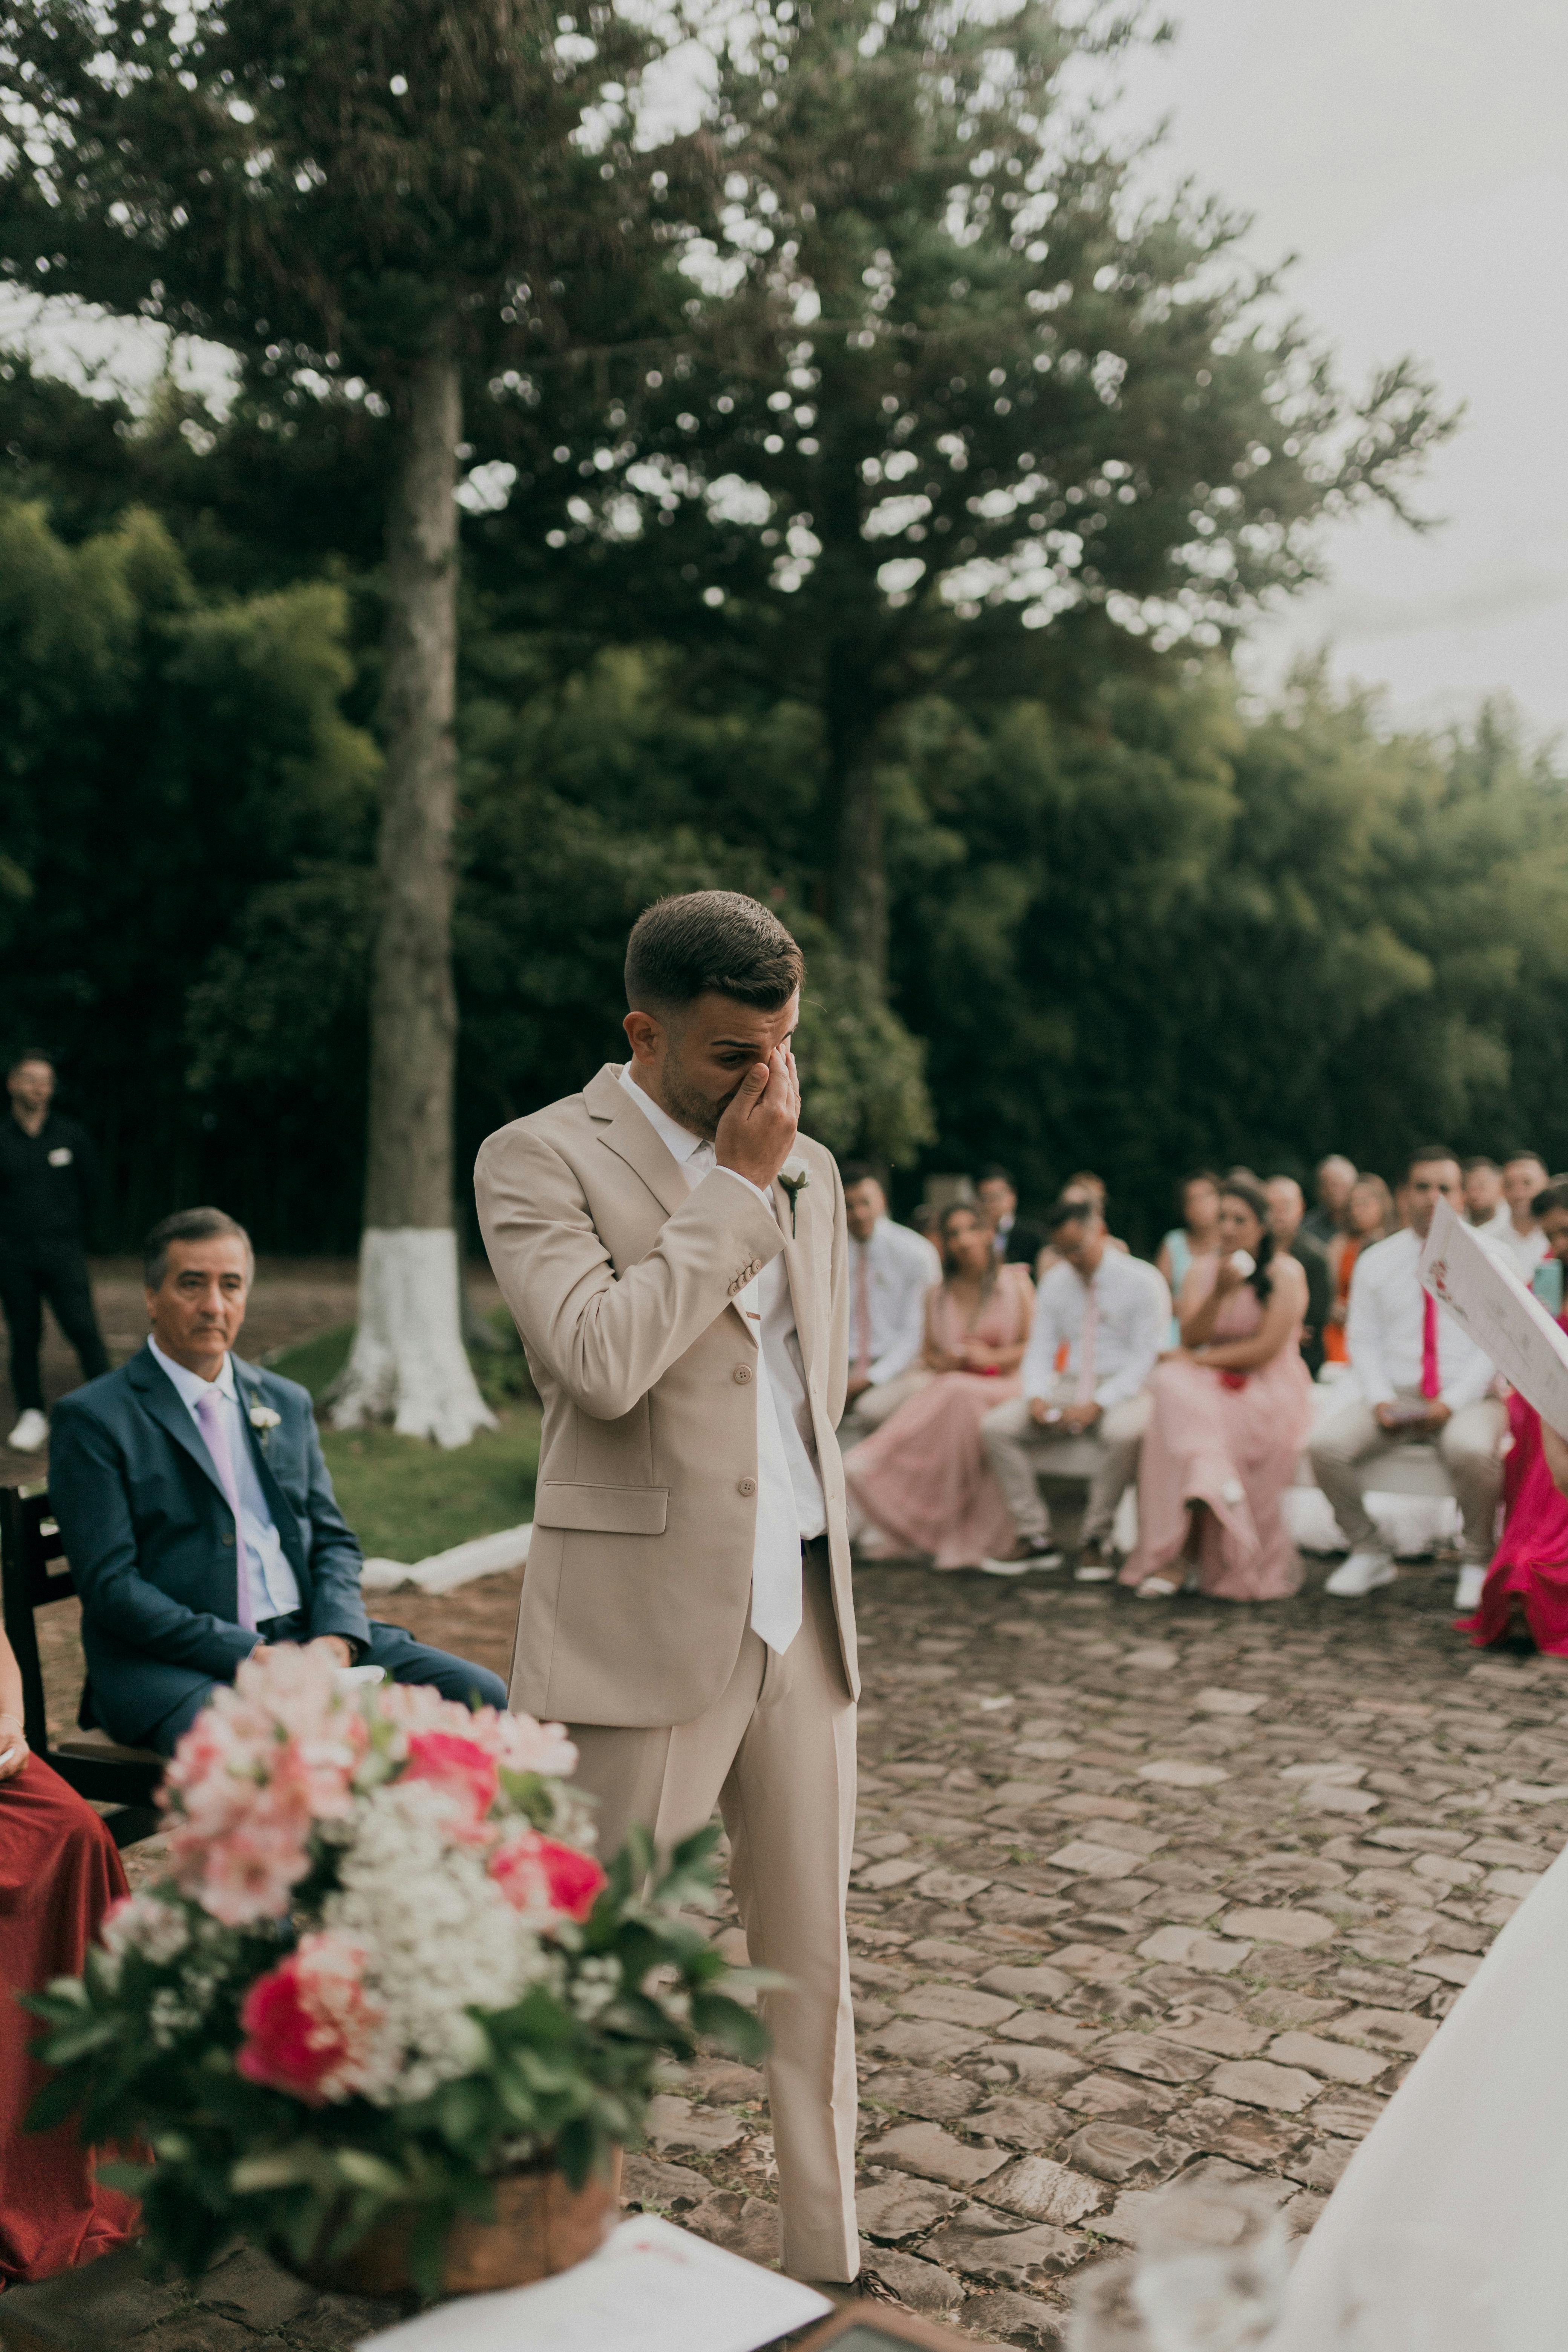 A frustrated and upset groom at his wedding | Source: Pexels